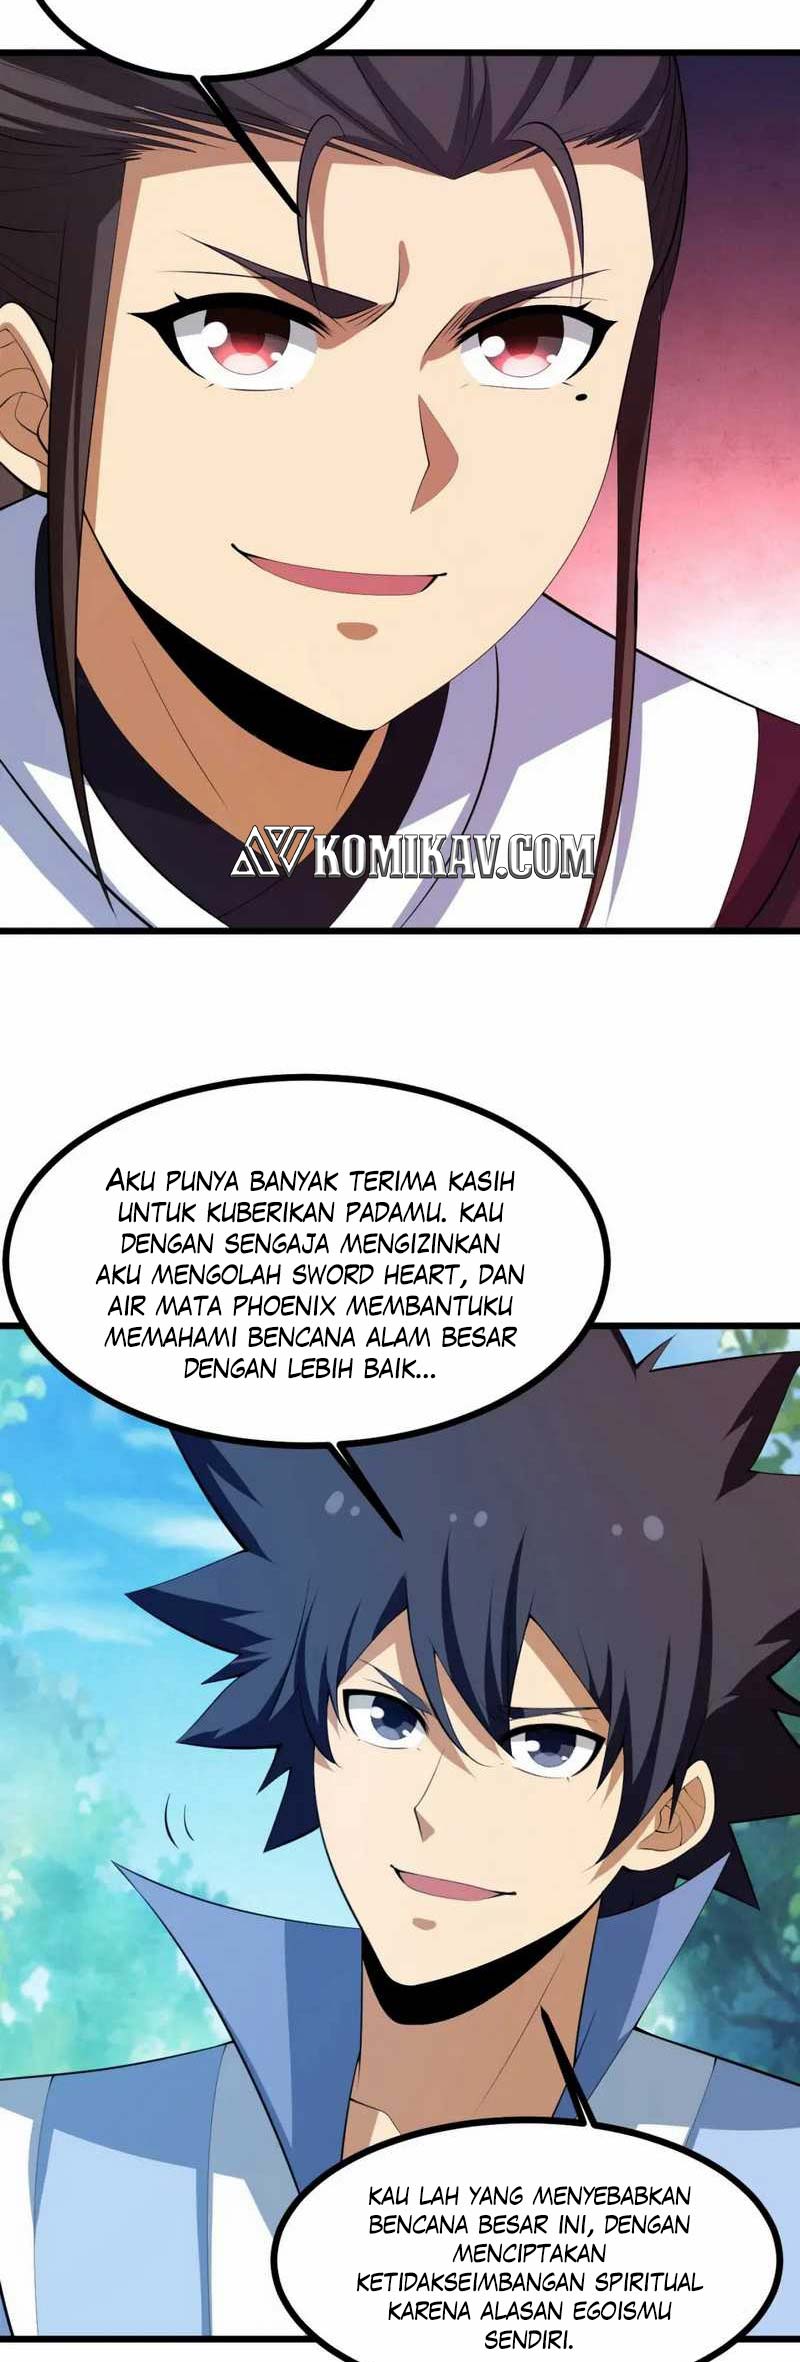 Dilarang COPAS - situs resmi www.mangacanblog.com - Komik i just want to be beaten to death by everyone 180 - chapter 180 181 Indonesia i just want to be beaten to death by everyone 180 - chapter 180 Terbaru 8|Baca Manga Komik Indonesia|Mangacan